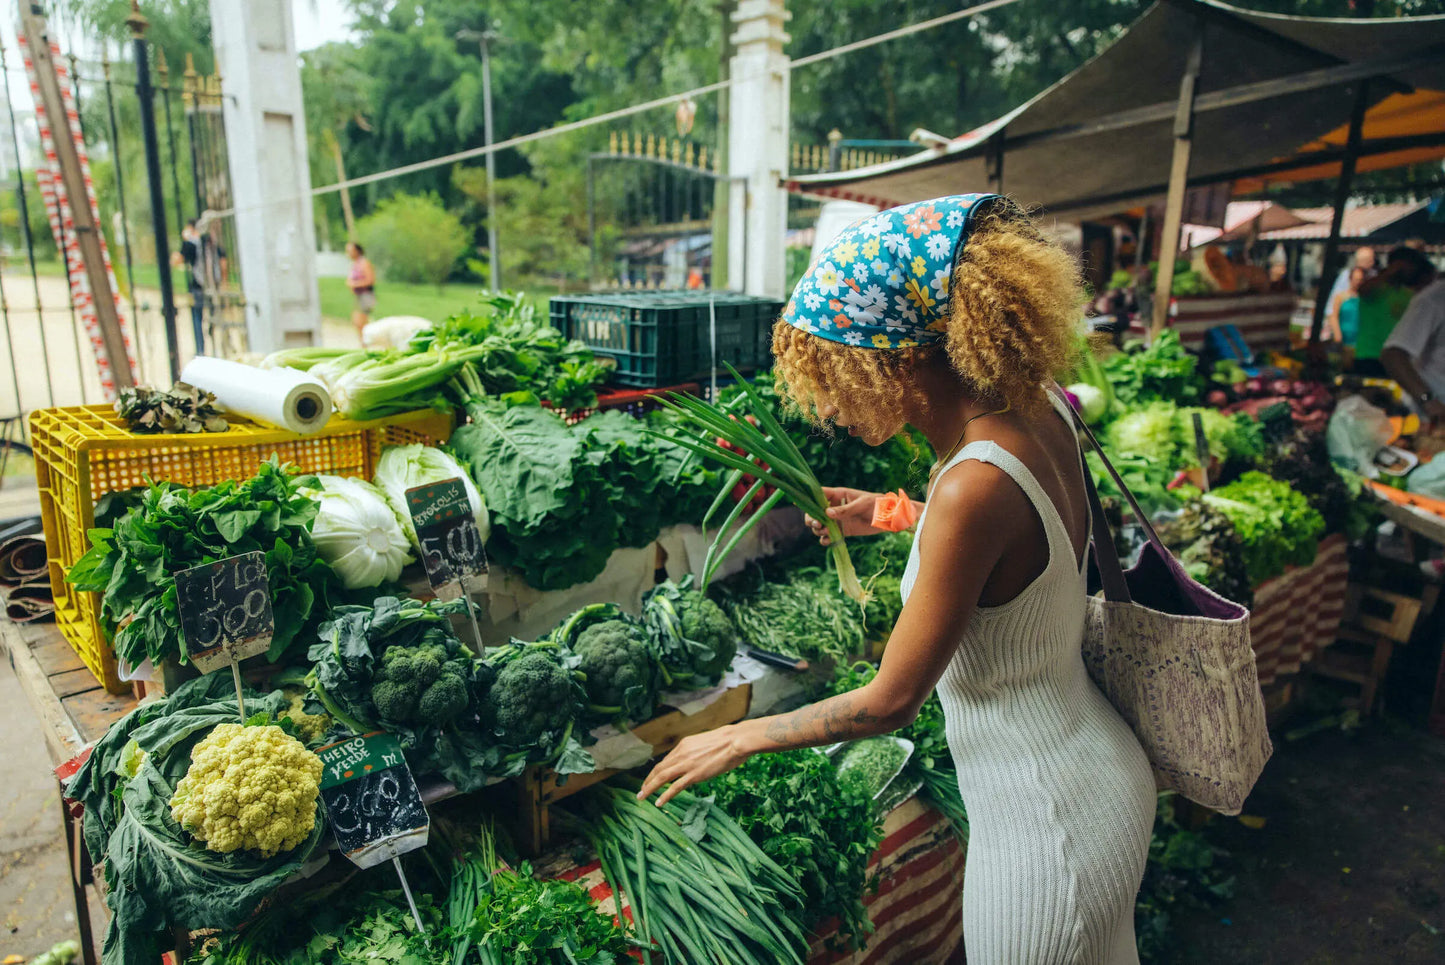 Woman shopping for vegetables with a bandana in her hair.